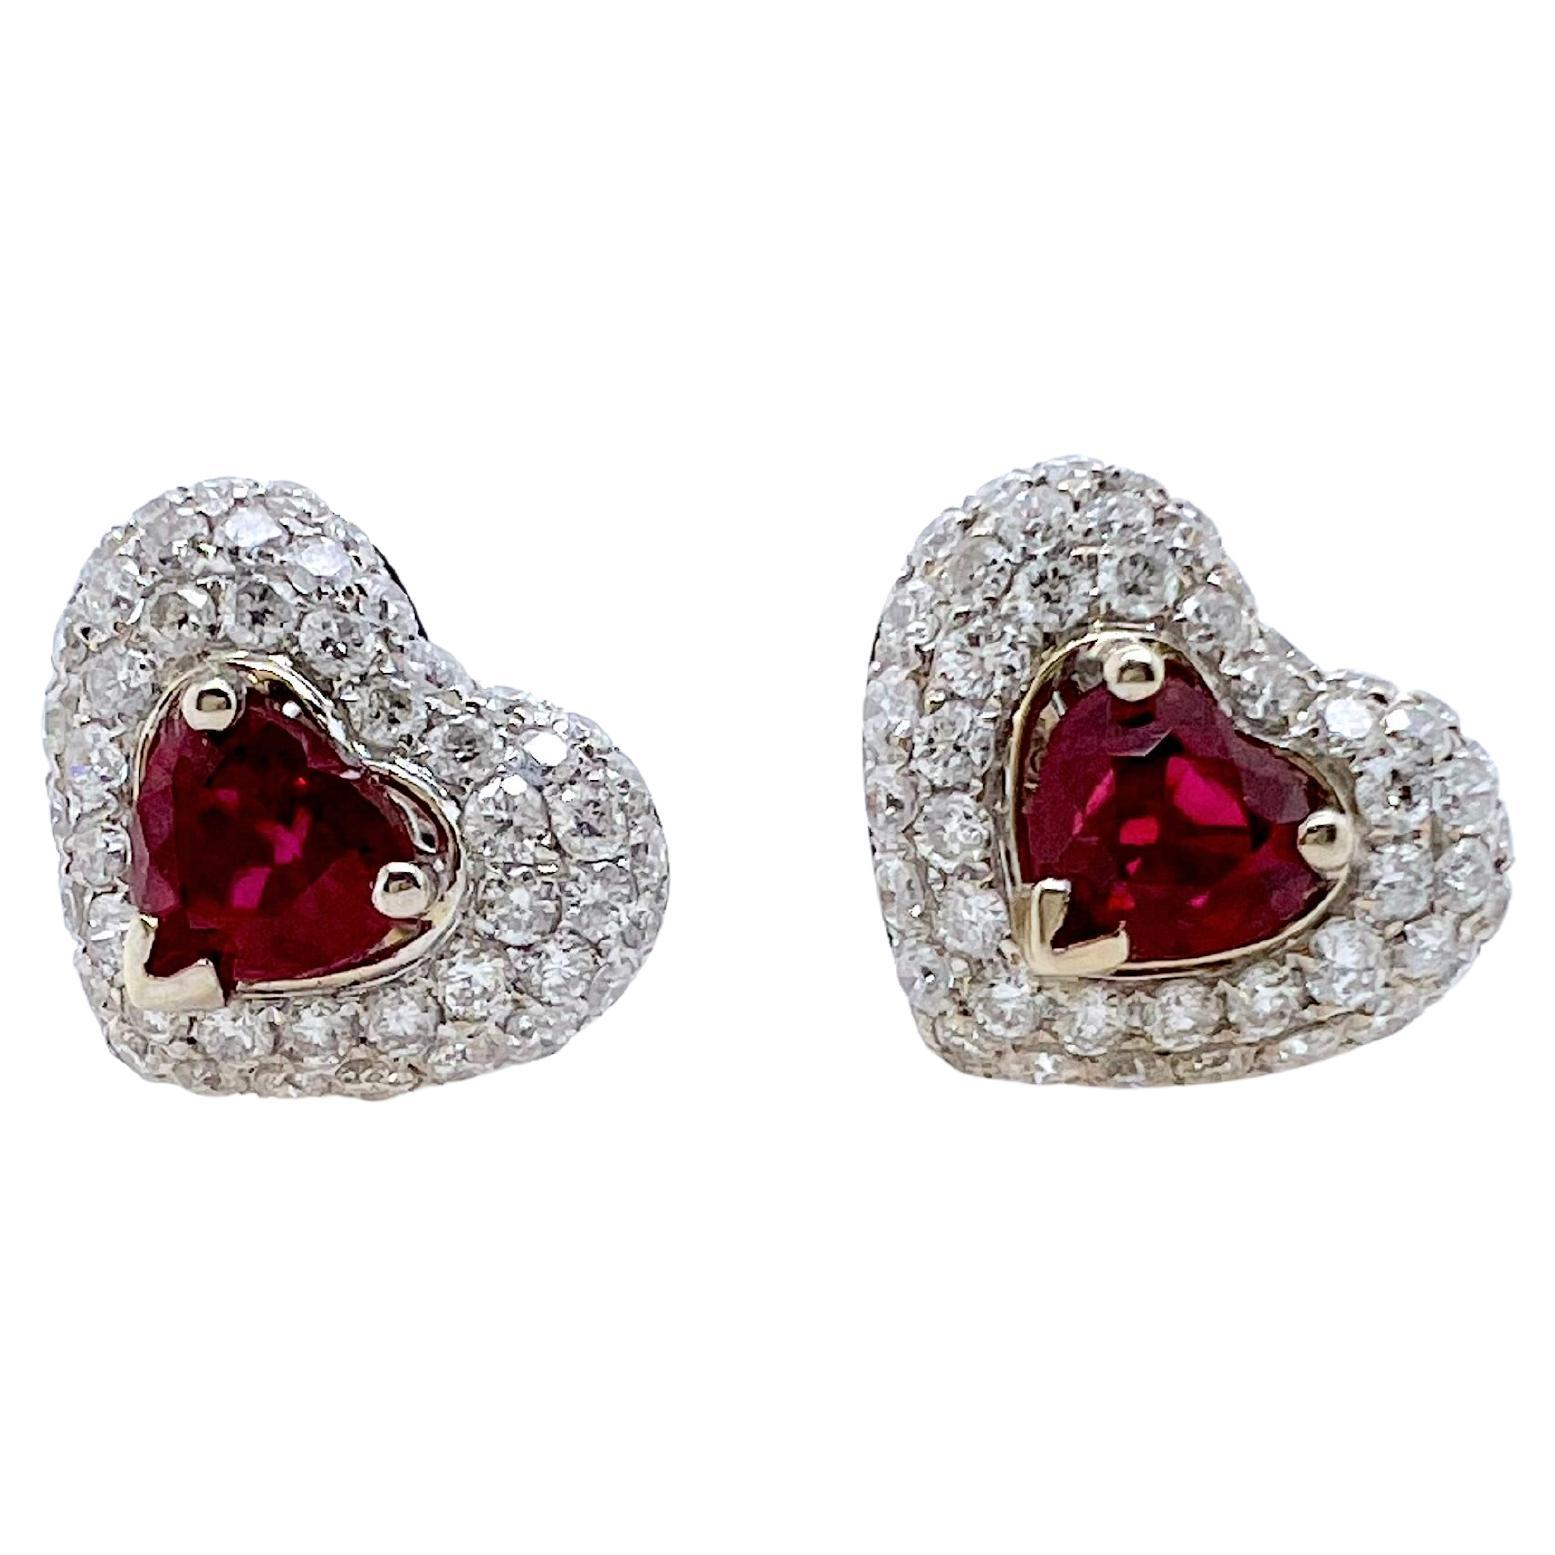 18k White Gold Heart Shaped Ruby Stud Earrings with Diamonds For Sale